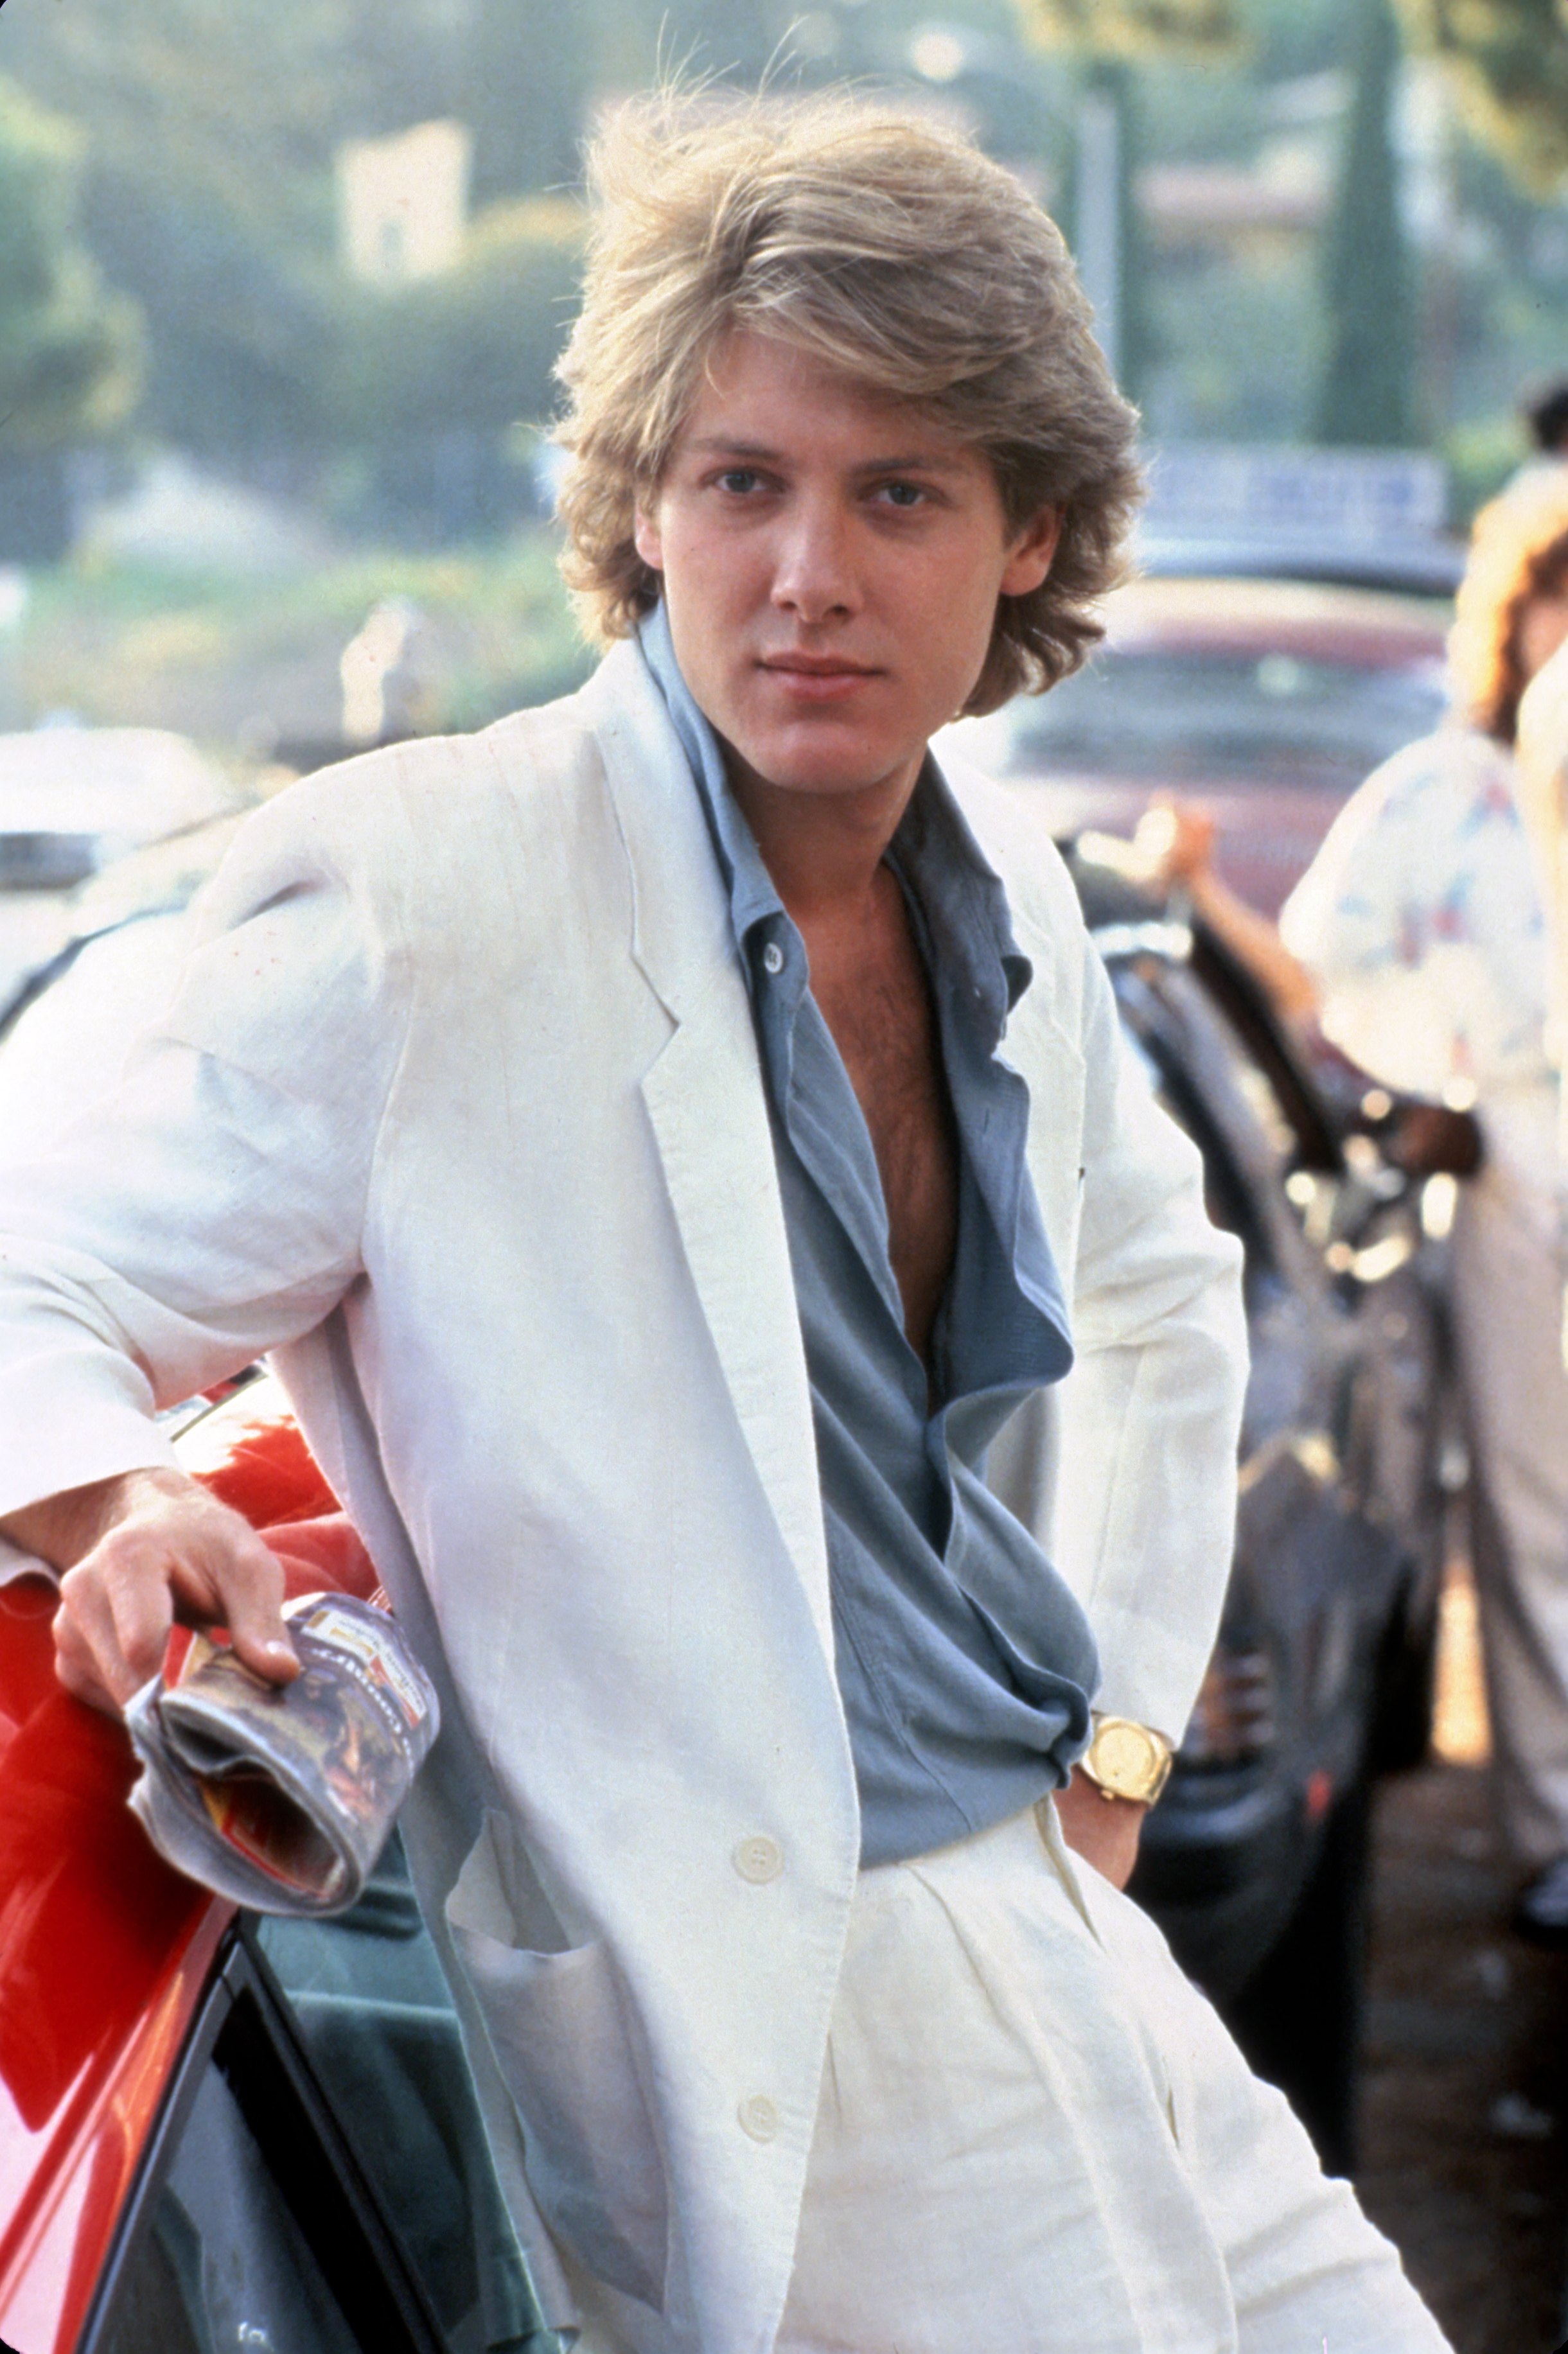 James Spader as Steff McKee in "Pretty in Pink" in 1986 | Source: Getty Images